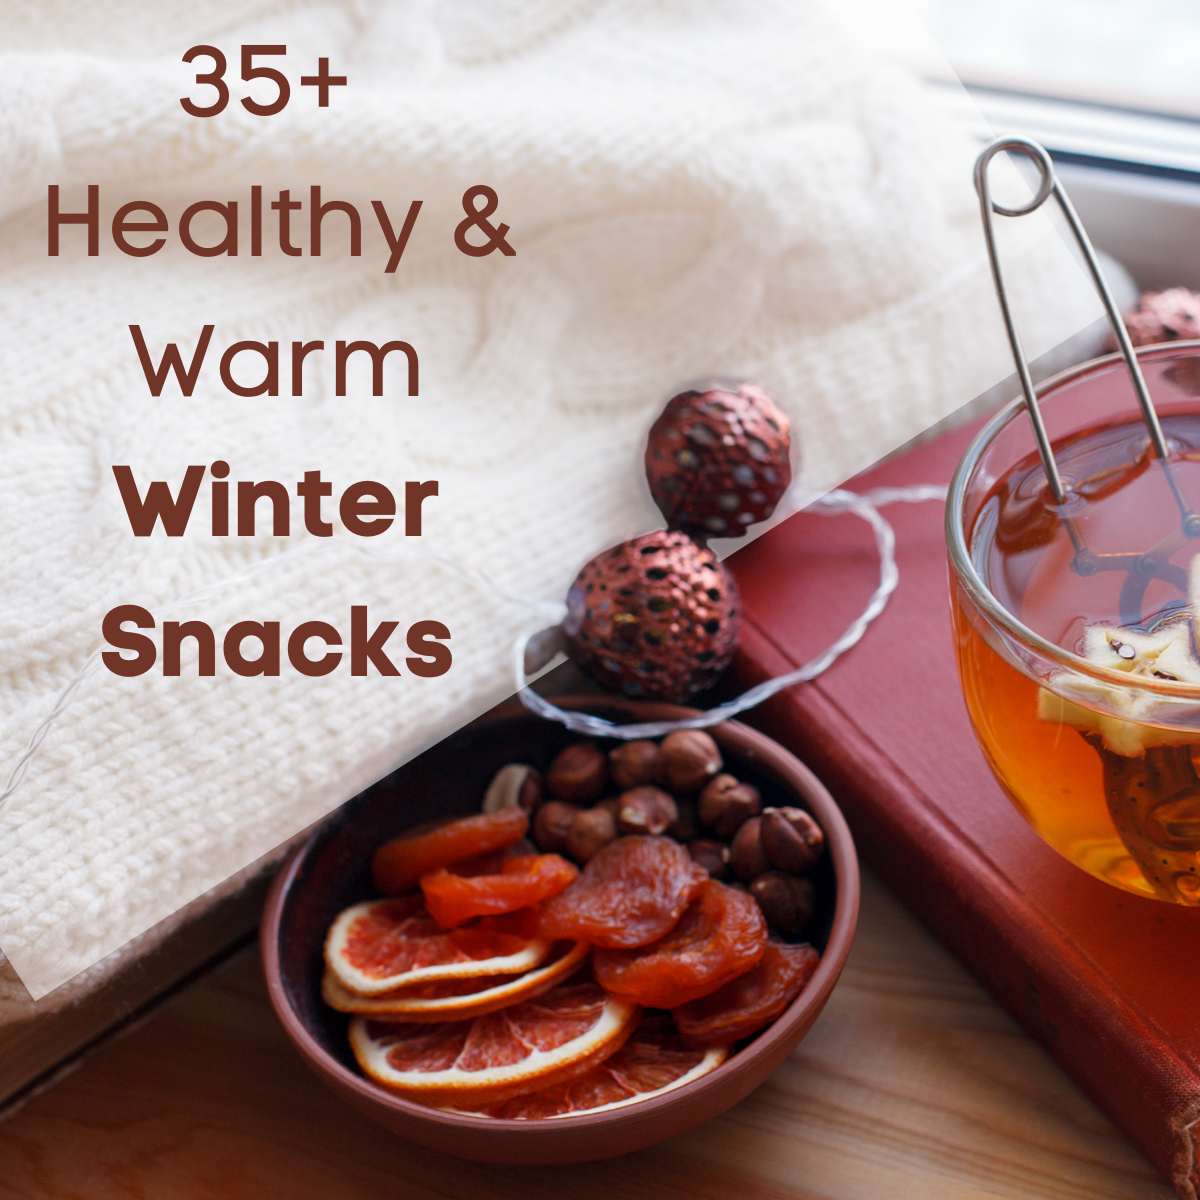 Bowl of spiced fruit, tea and cozy blanket. Text: 35+ Healthy & Warm Winter Snacks. 